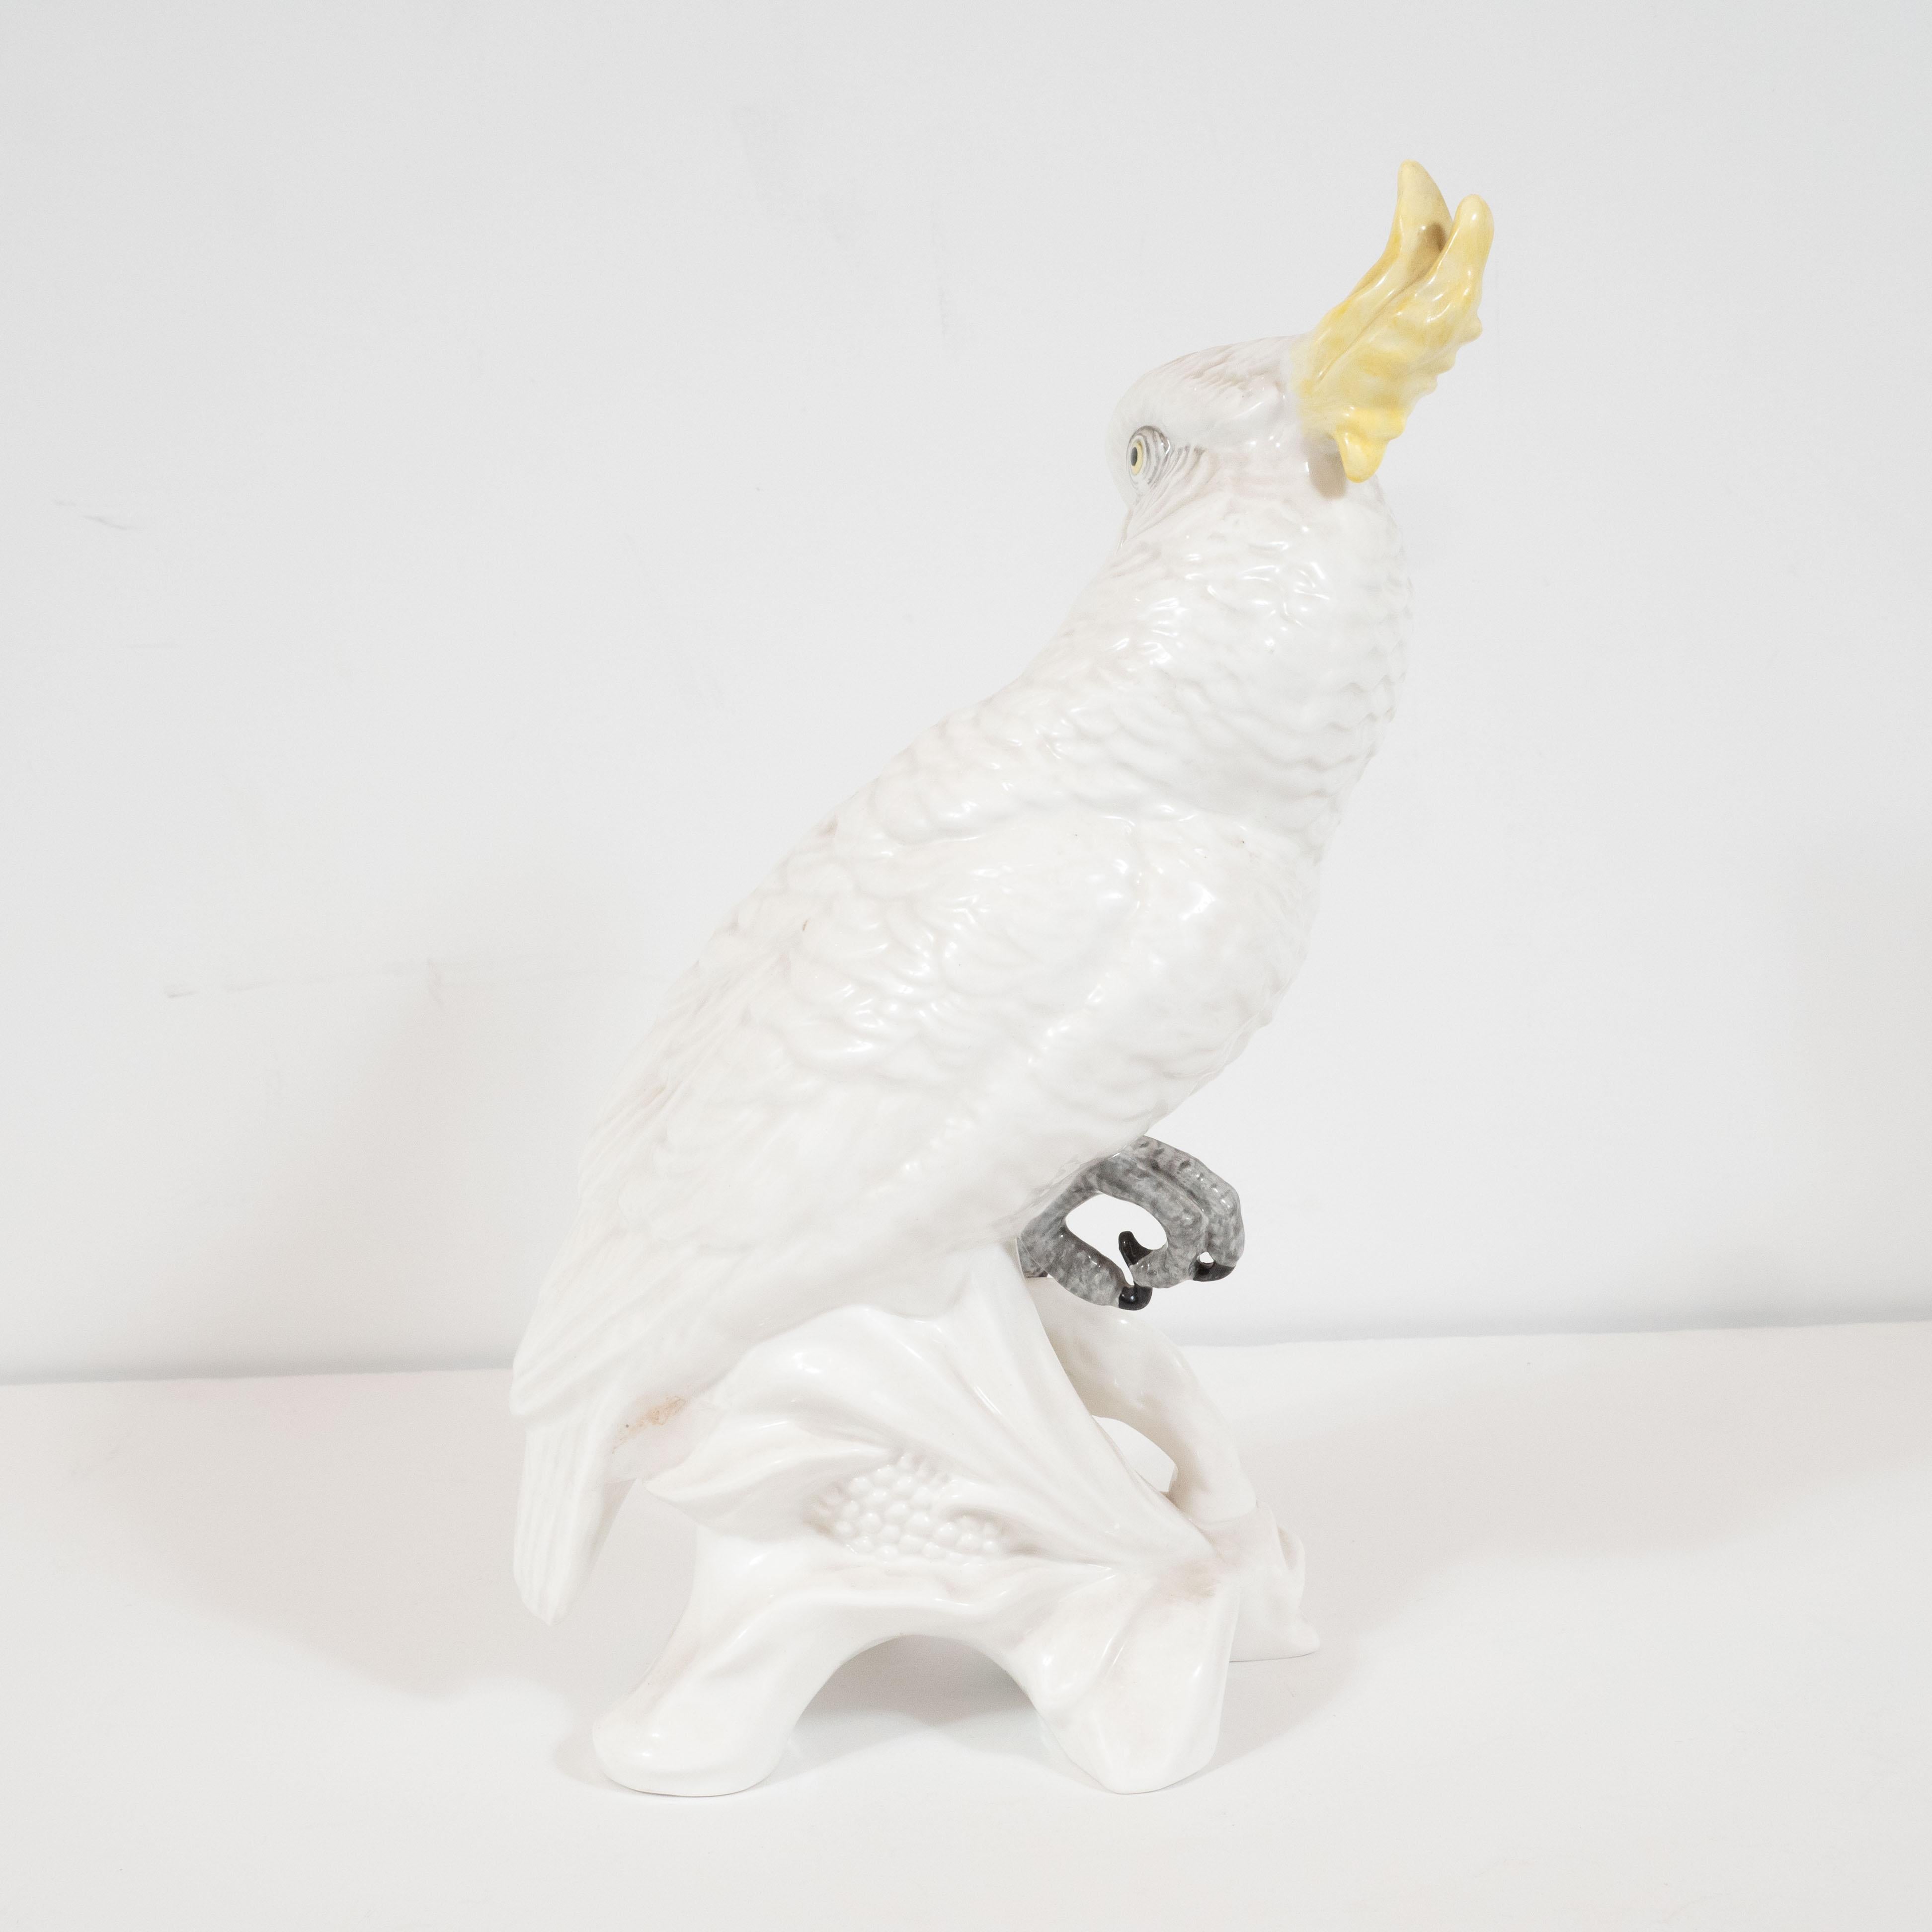 Mid-Century Modern White Porcelain Cockatoo by T.J. Jones for Staffordshire 1